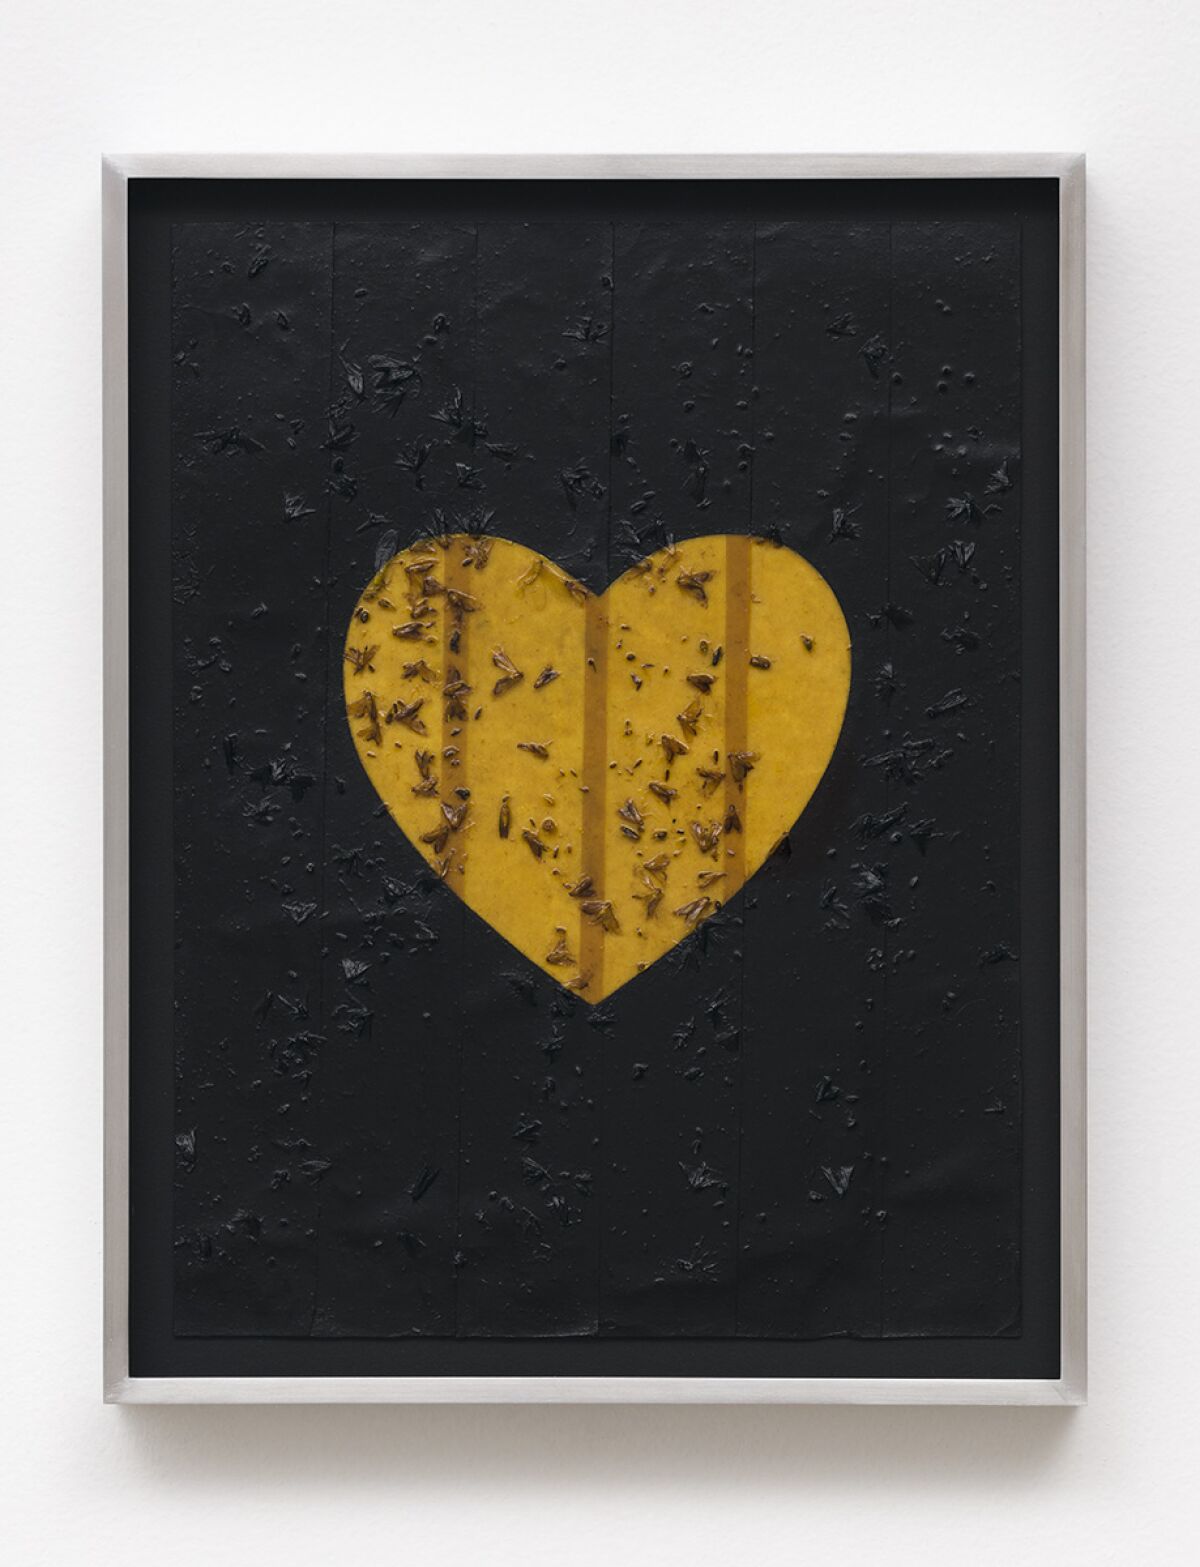 A painting in black shows a heart out in the middle made of fly paper covered in flies.